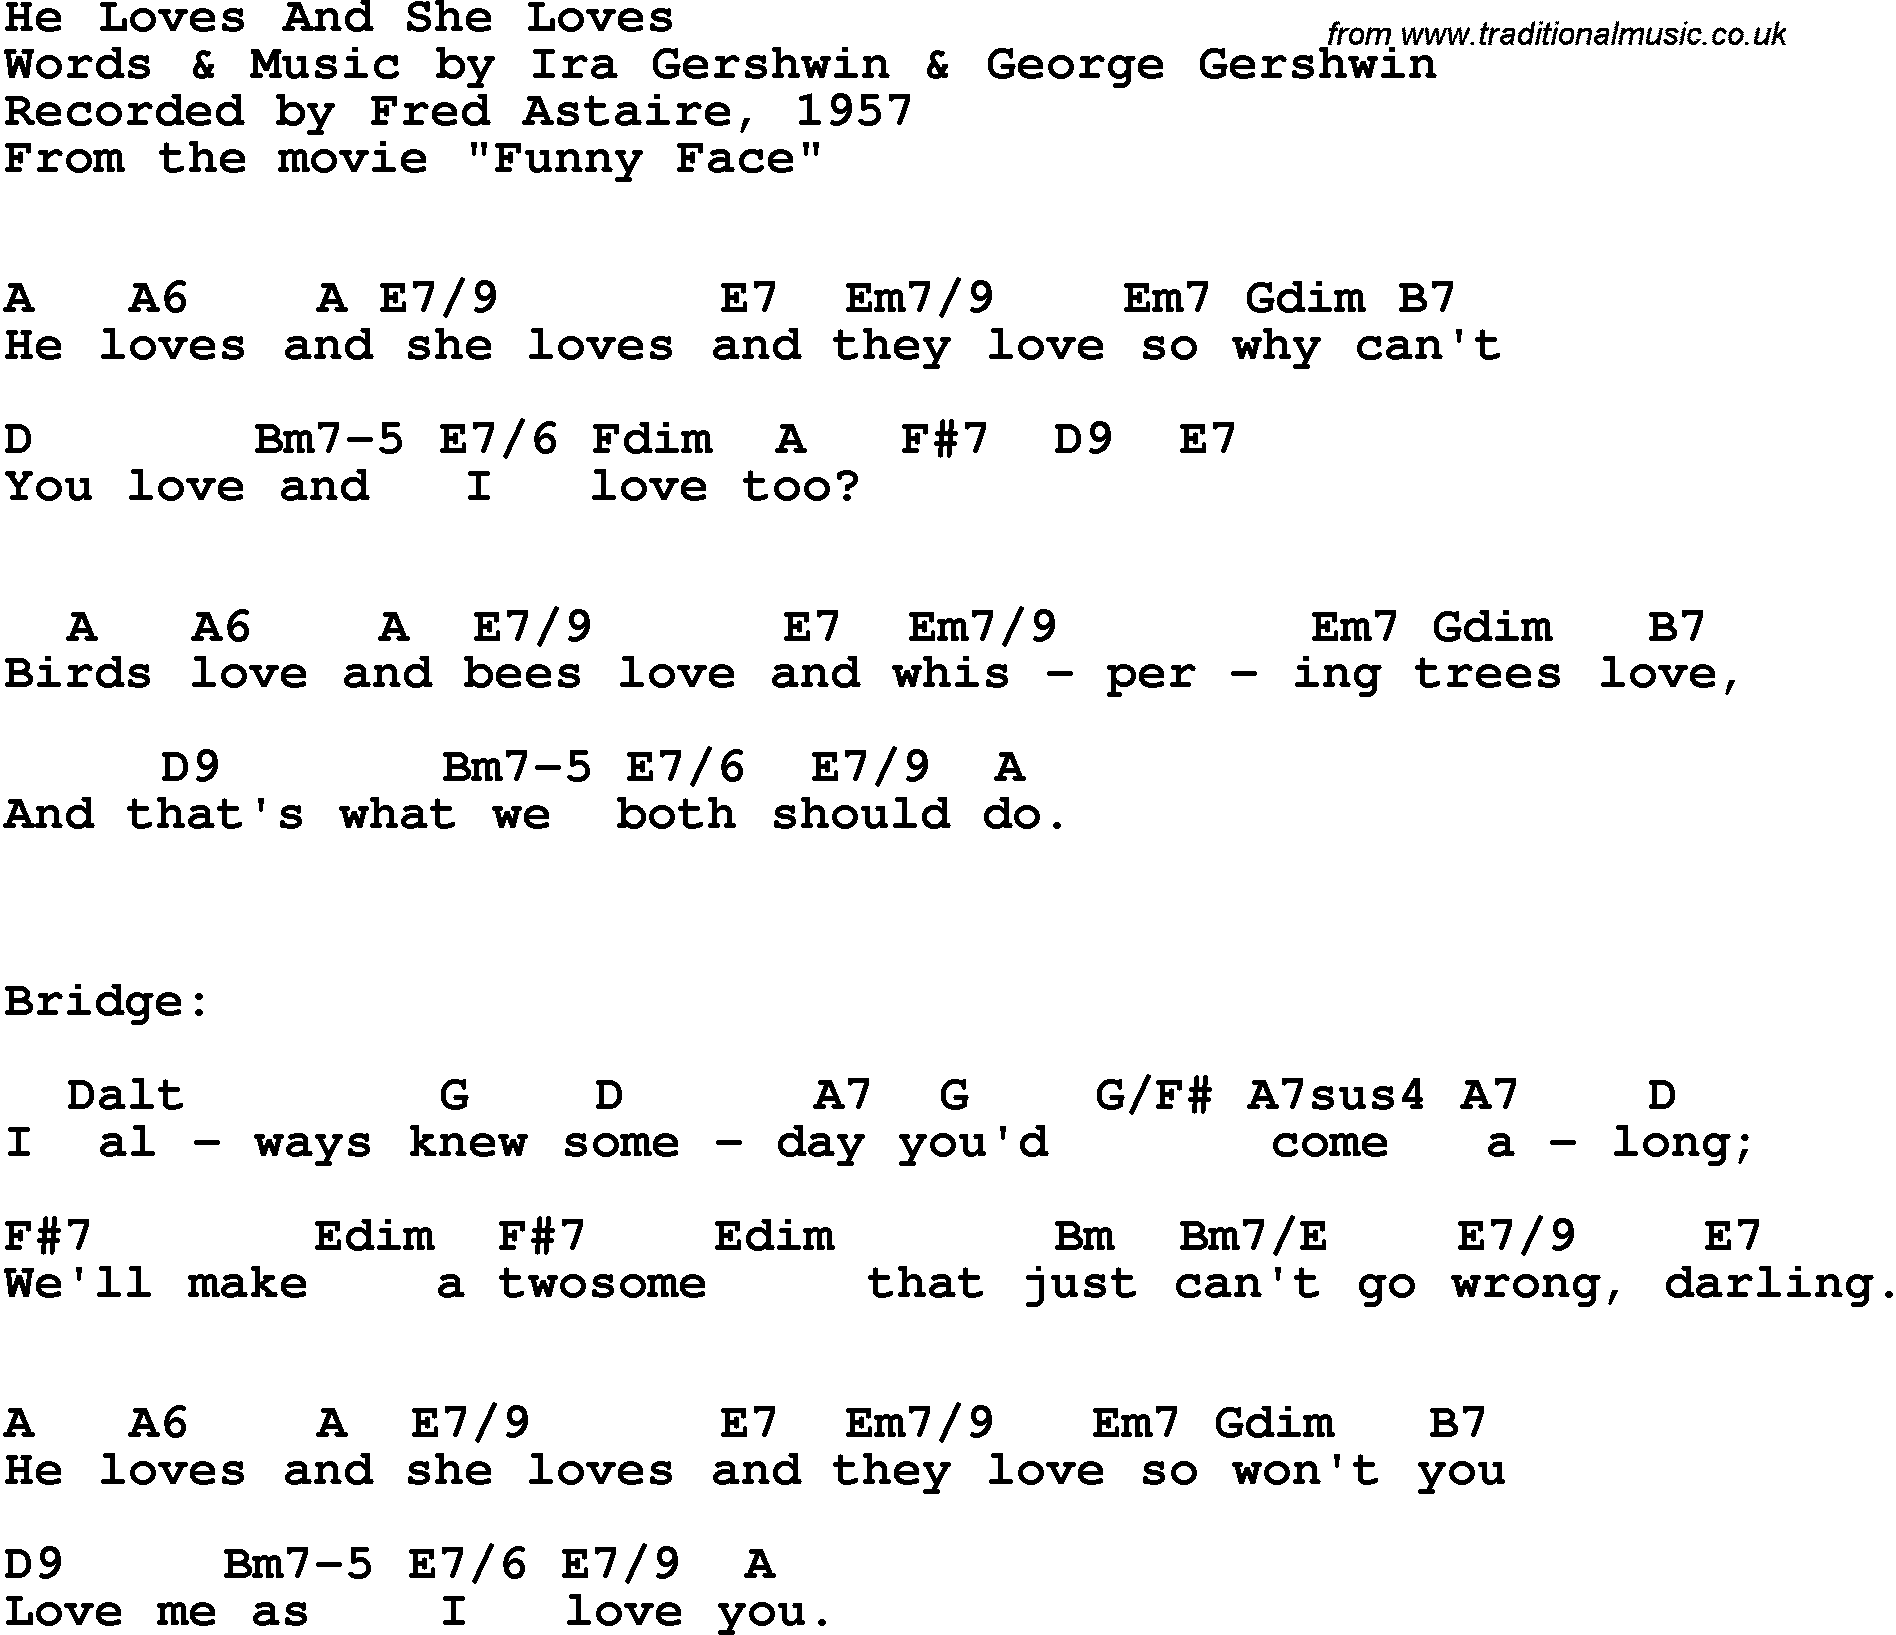 Song Lyrics with guitar chords for He Loves And She Loves - Fred Astaire, 1957